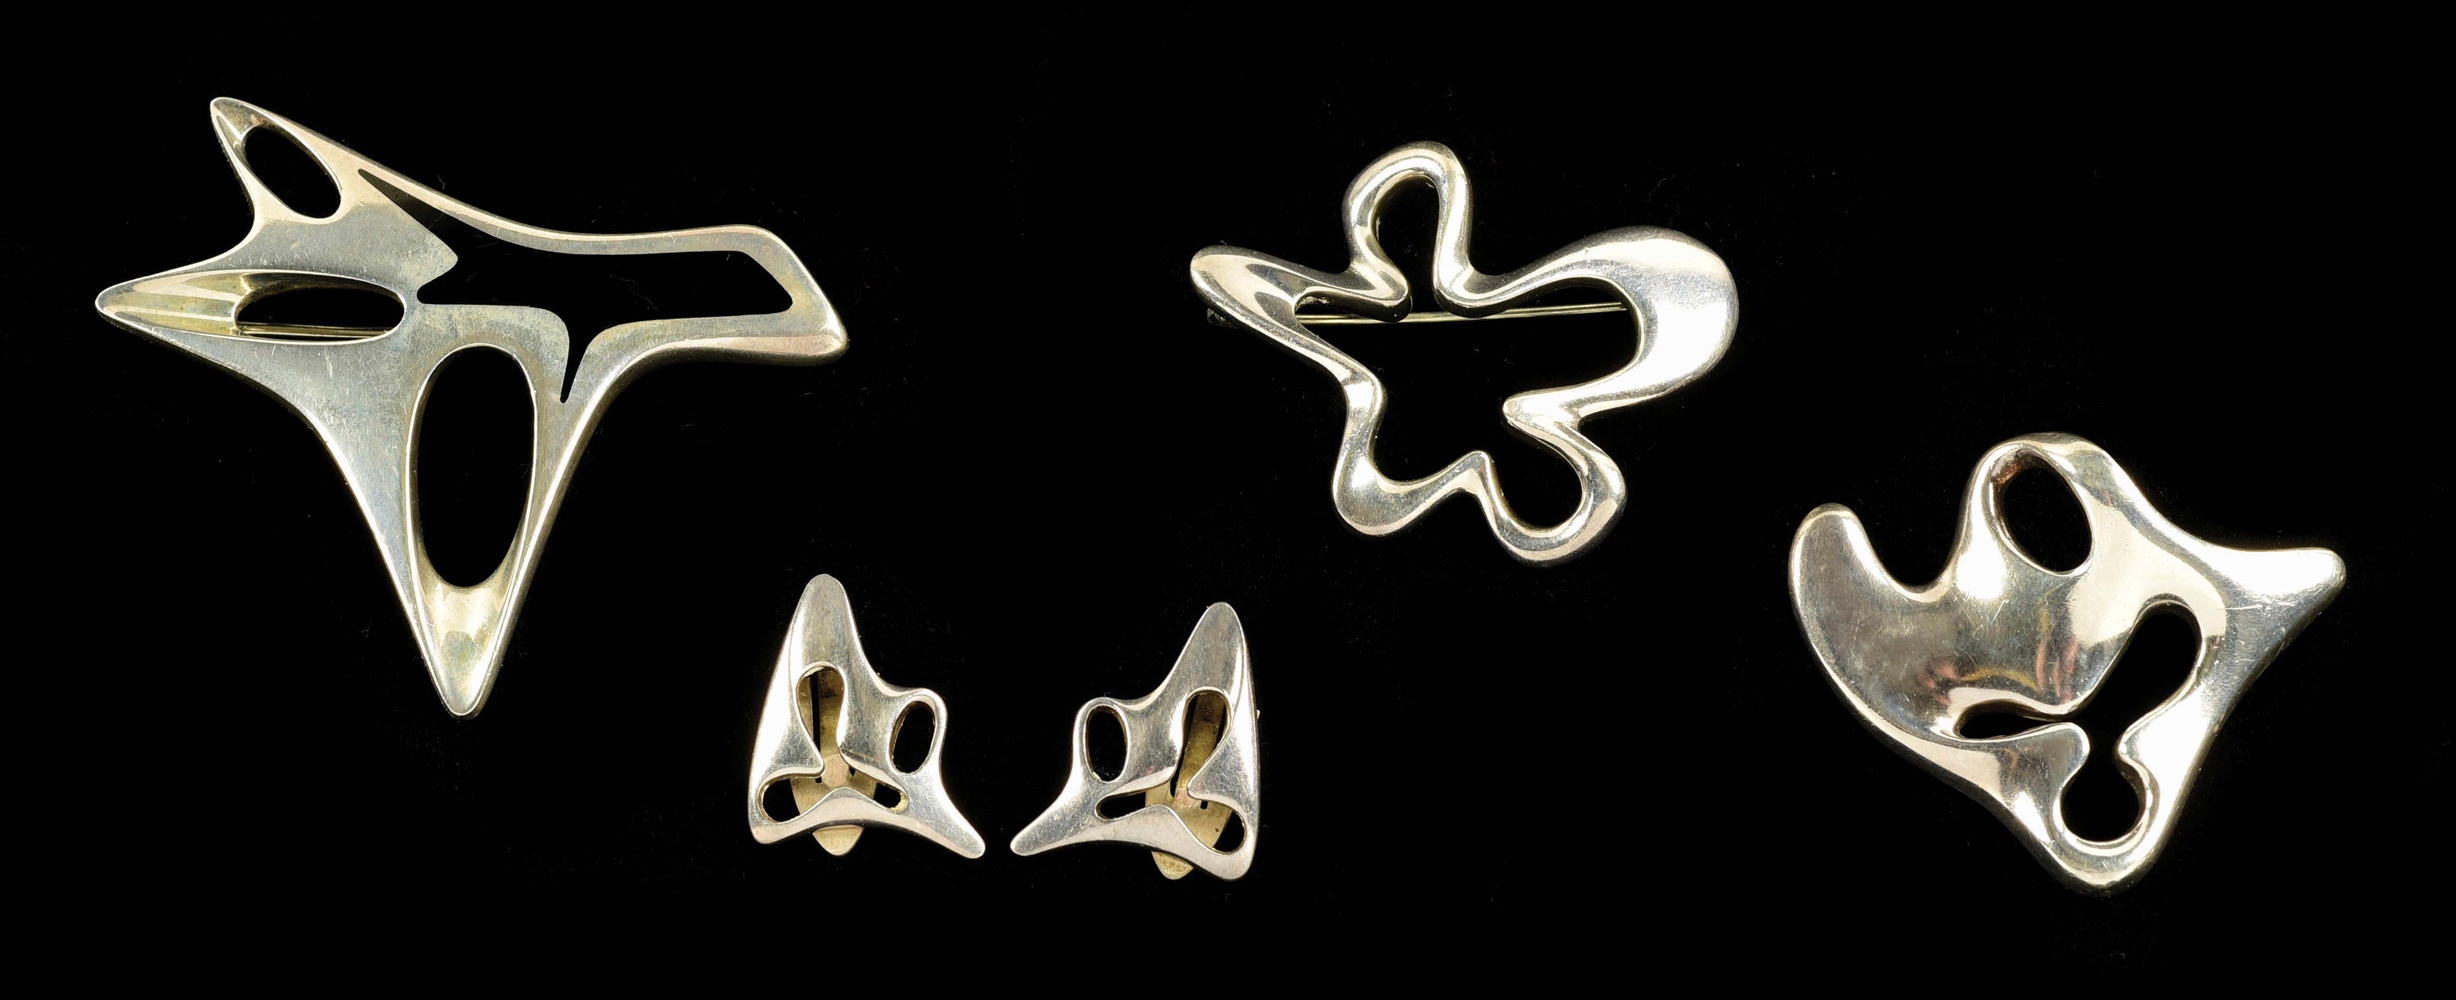 FOUR PIECES OF GEORG JENSEN JEWELRY IN STERLING SILVER. 